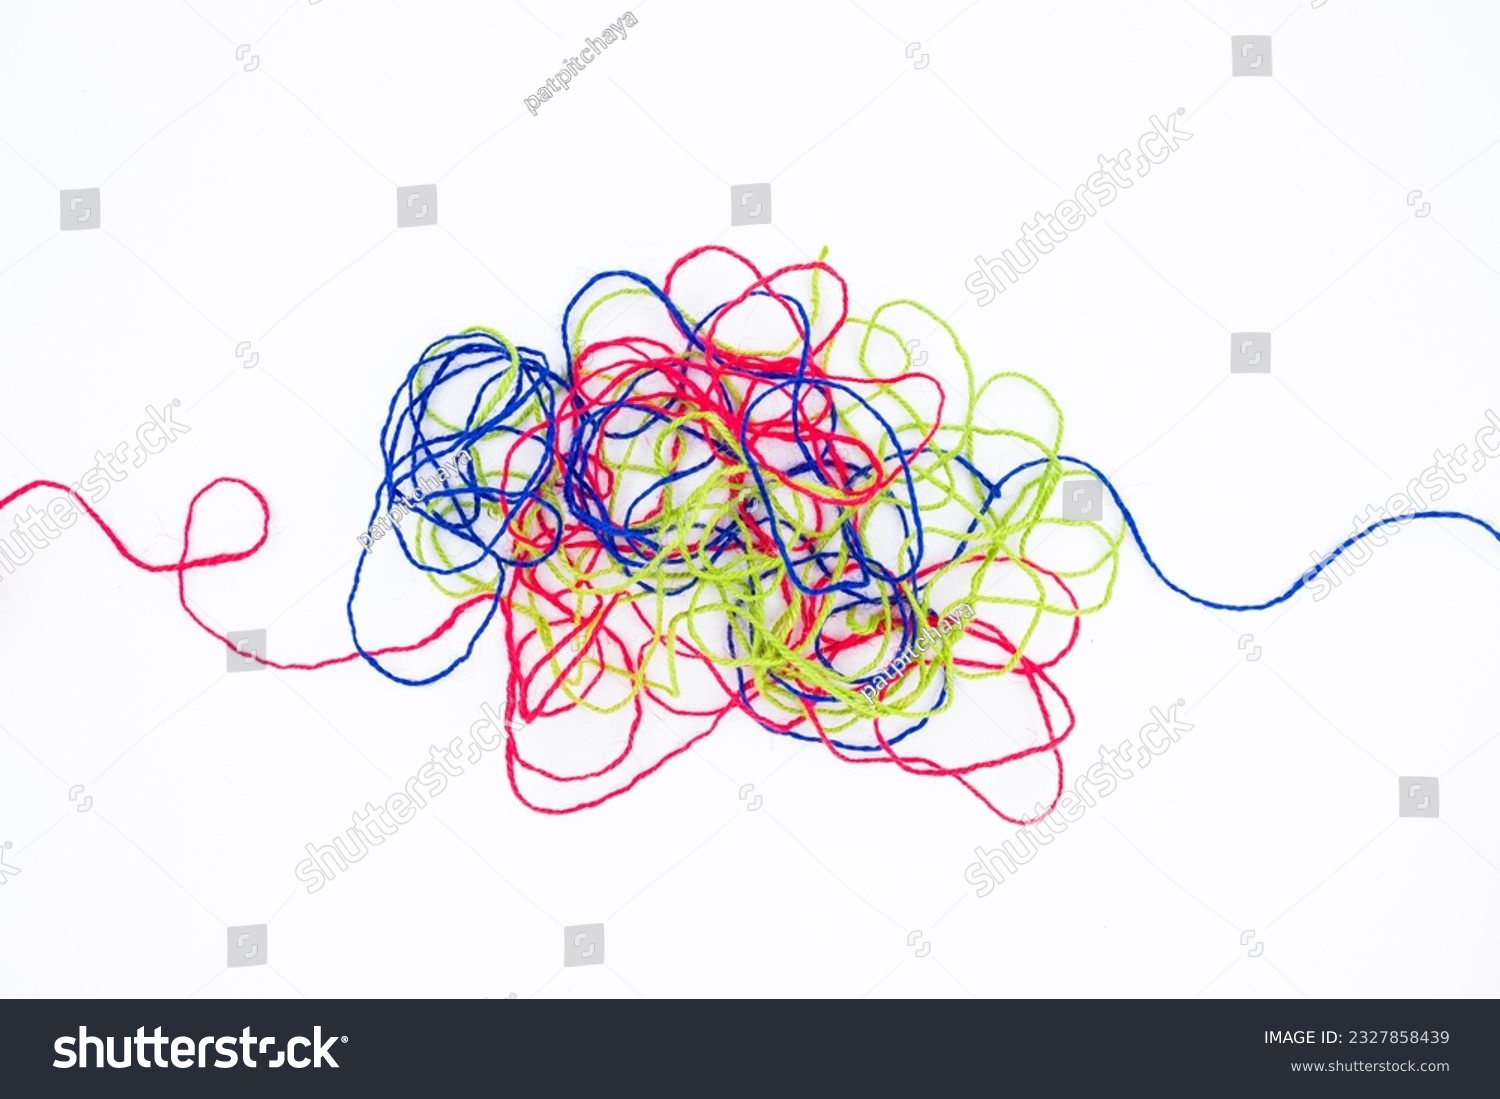 Tangled ropes on white background, three colorful ropes in confusion, psychotherapy, or difficult problem that hard to resolve #2327858439